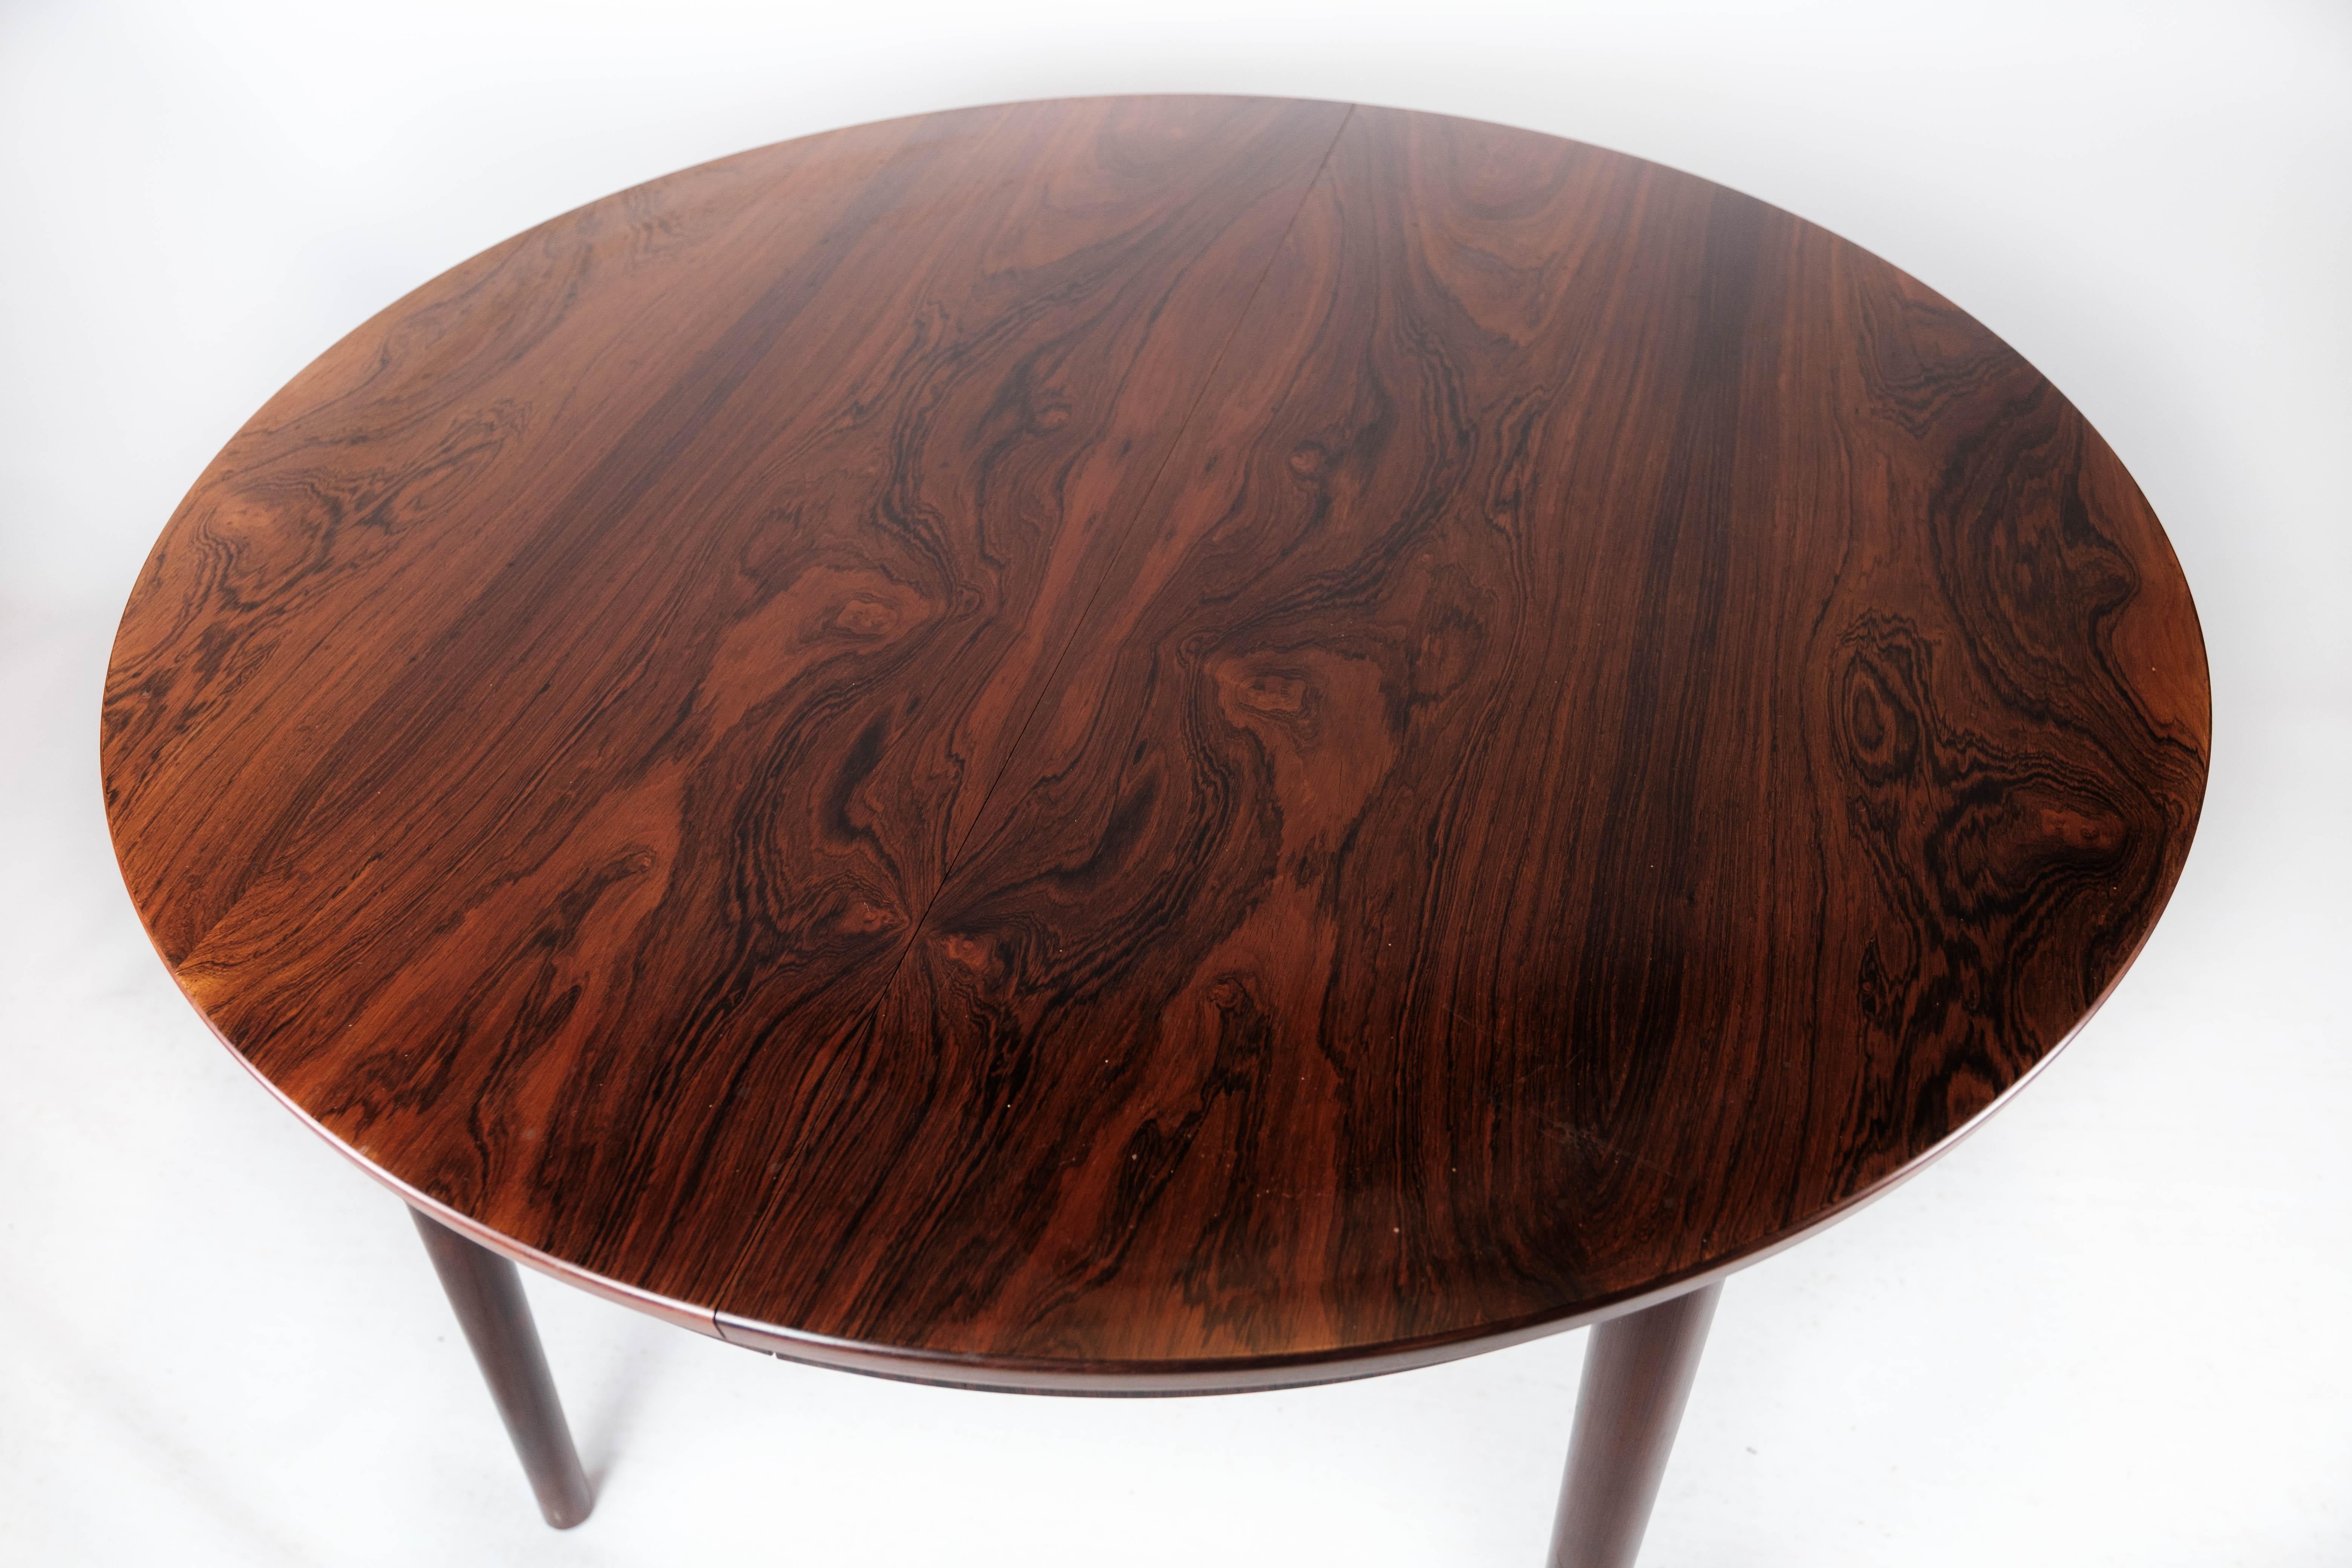 Scandinavian Modern Round Dining Table in Rosewood of Danish Design from the 1960s